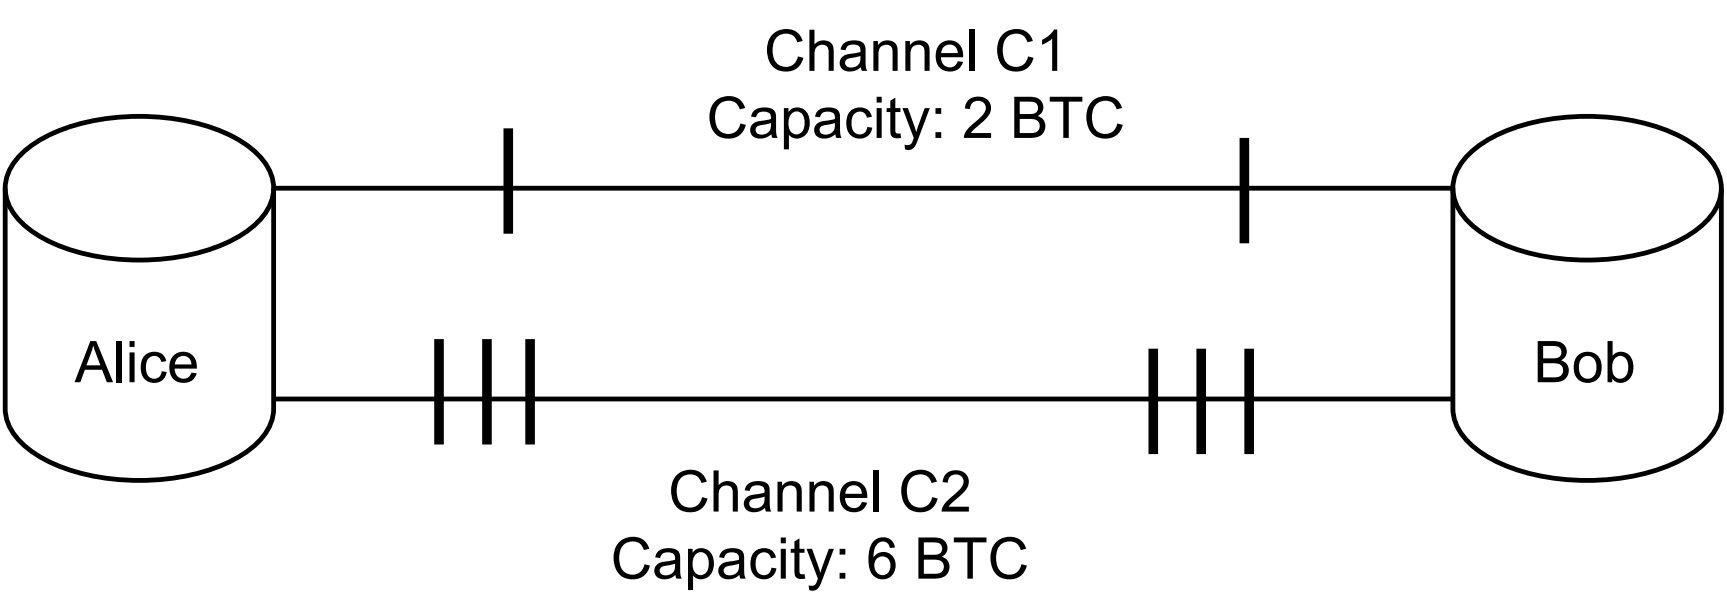 Parallel channels